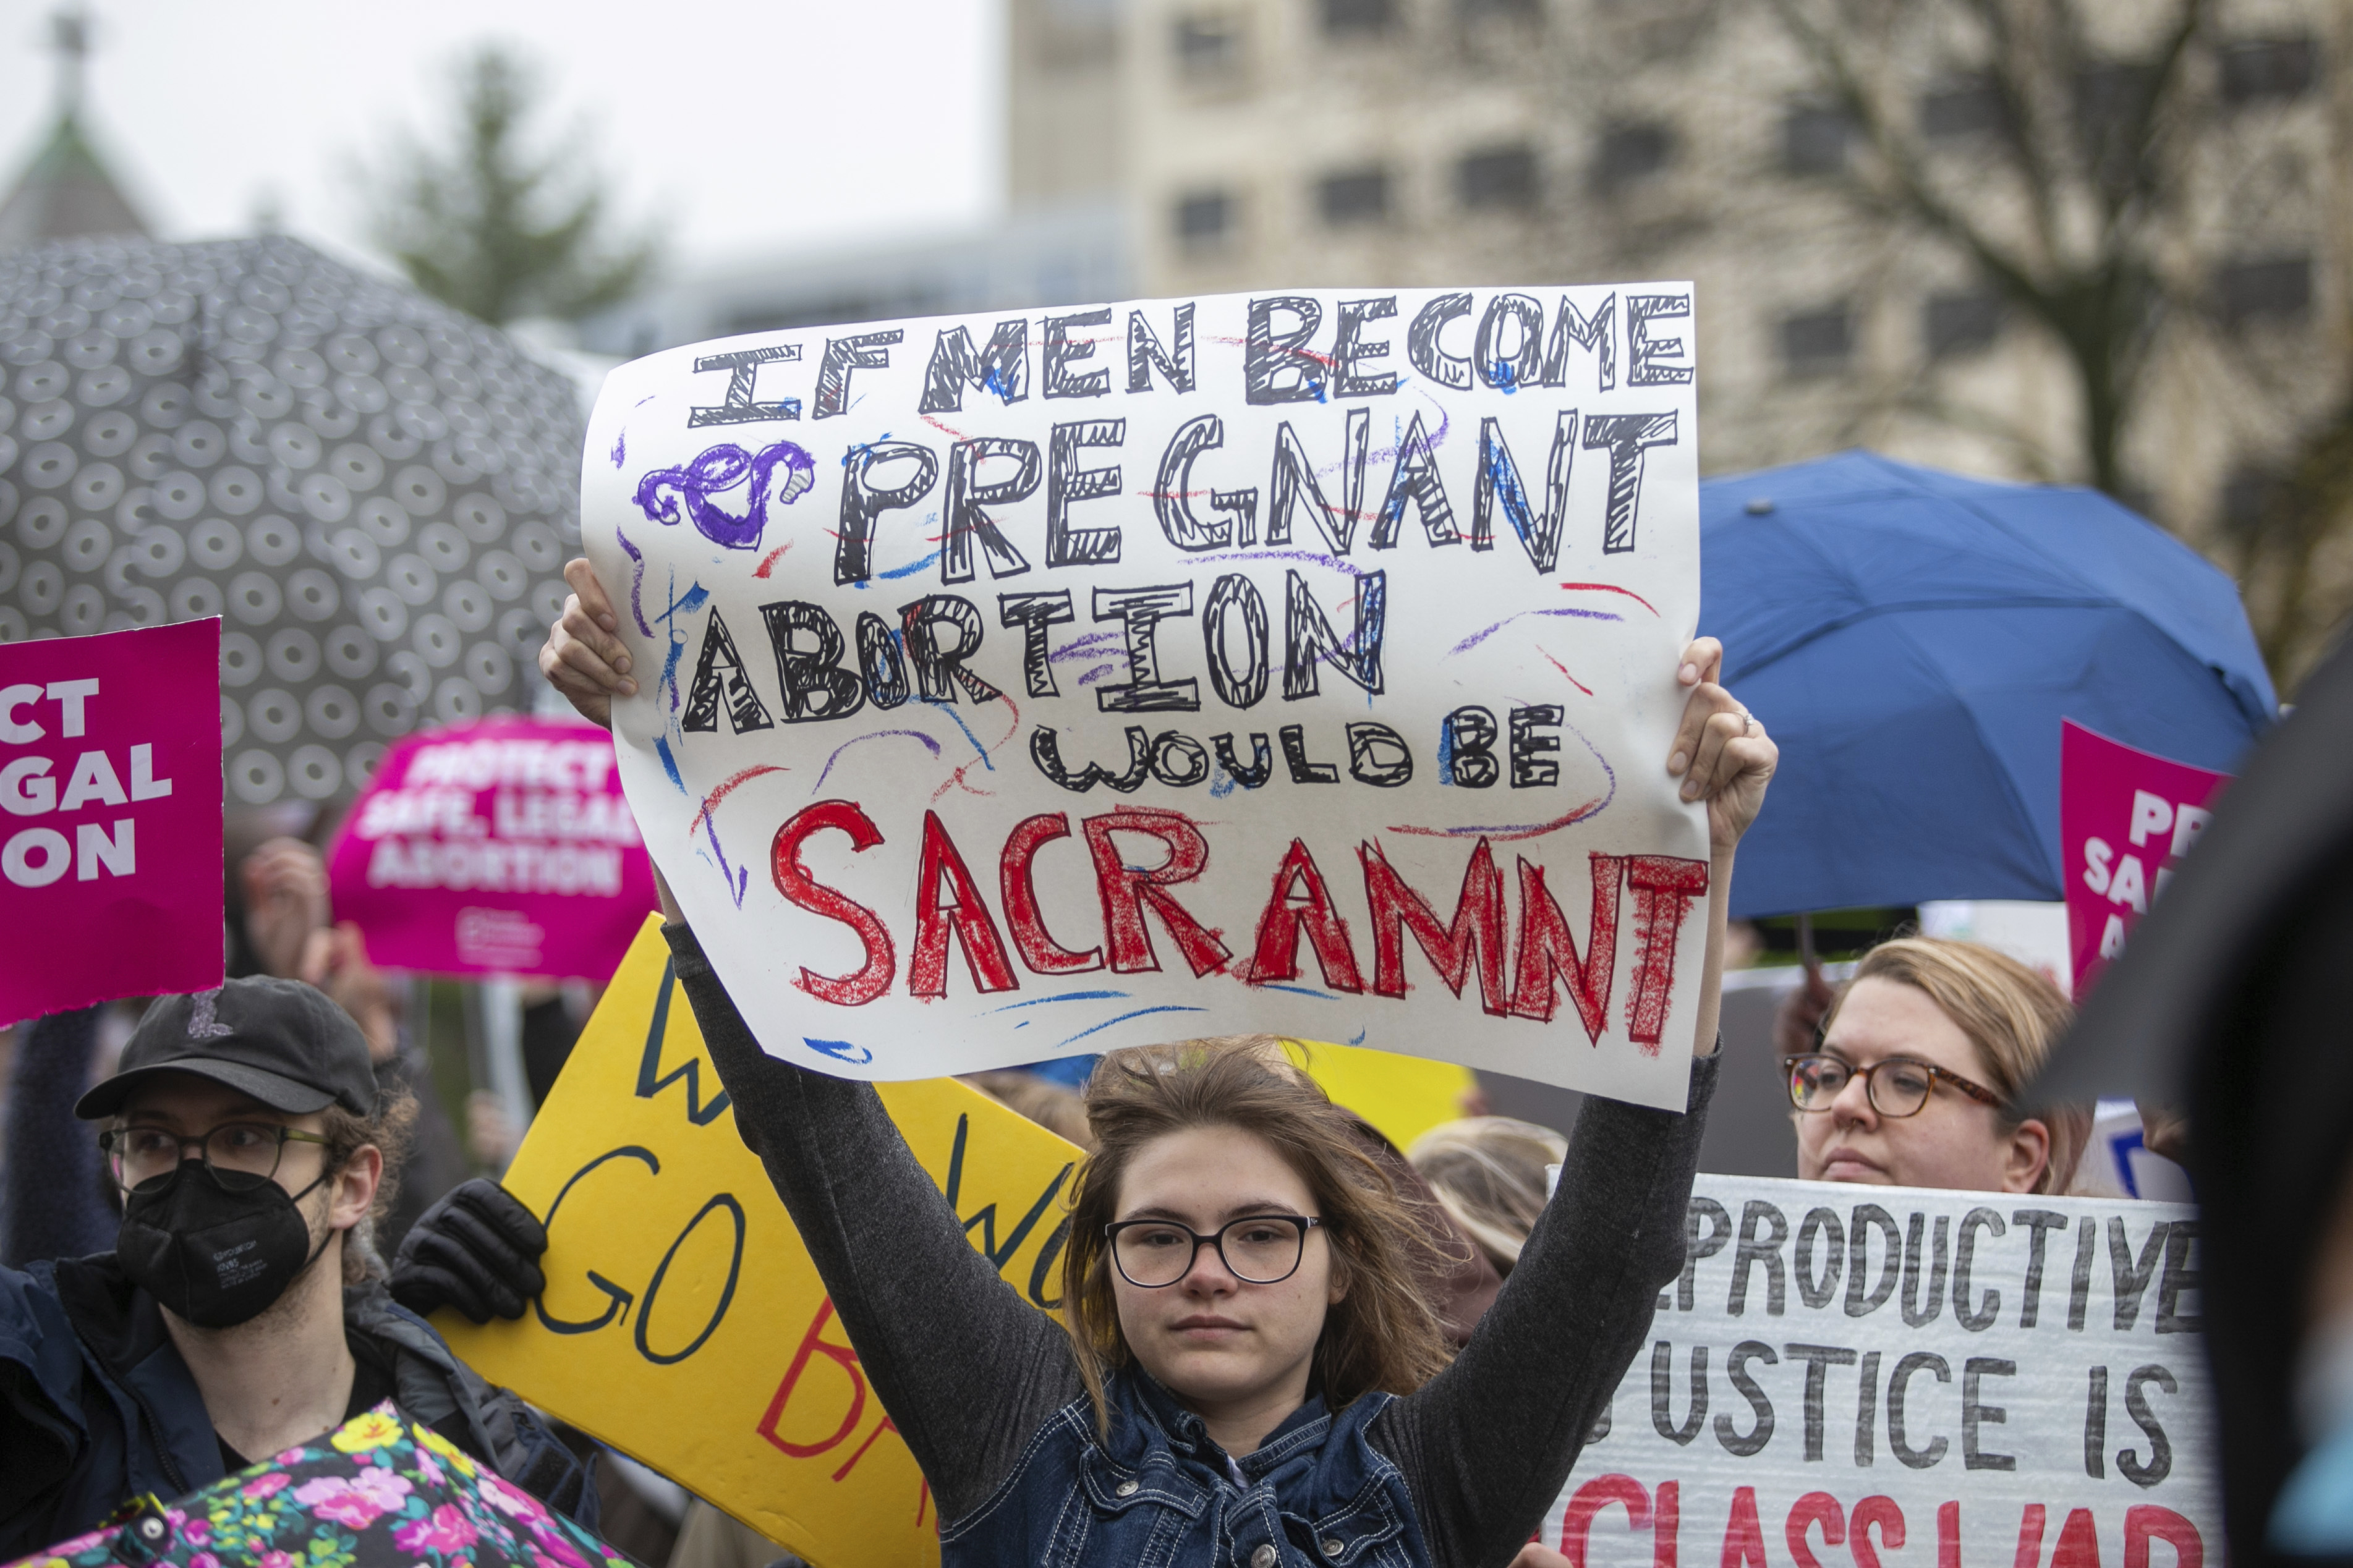 Even Abortion Rights Opponents Are Aghast at Brutality of GOP Bill